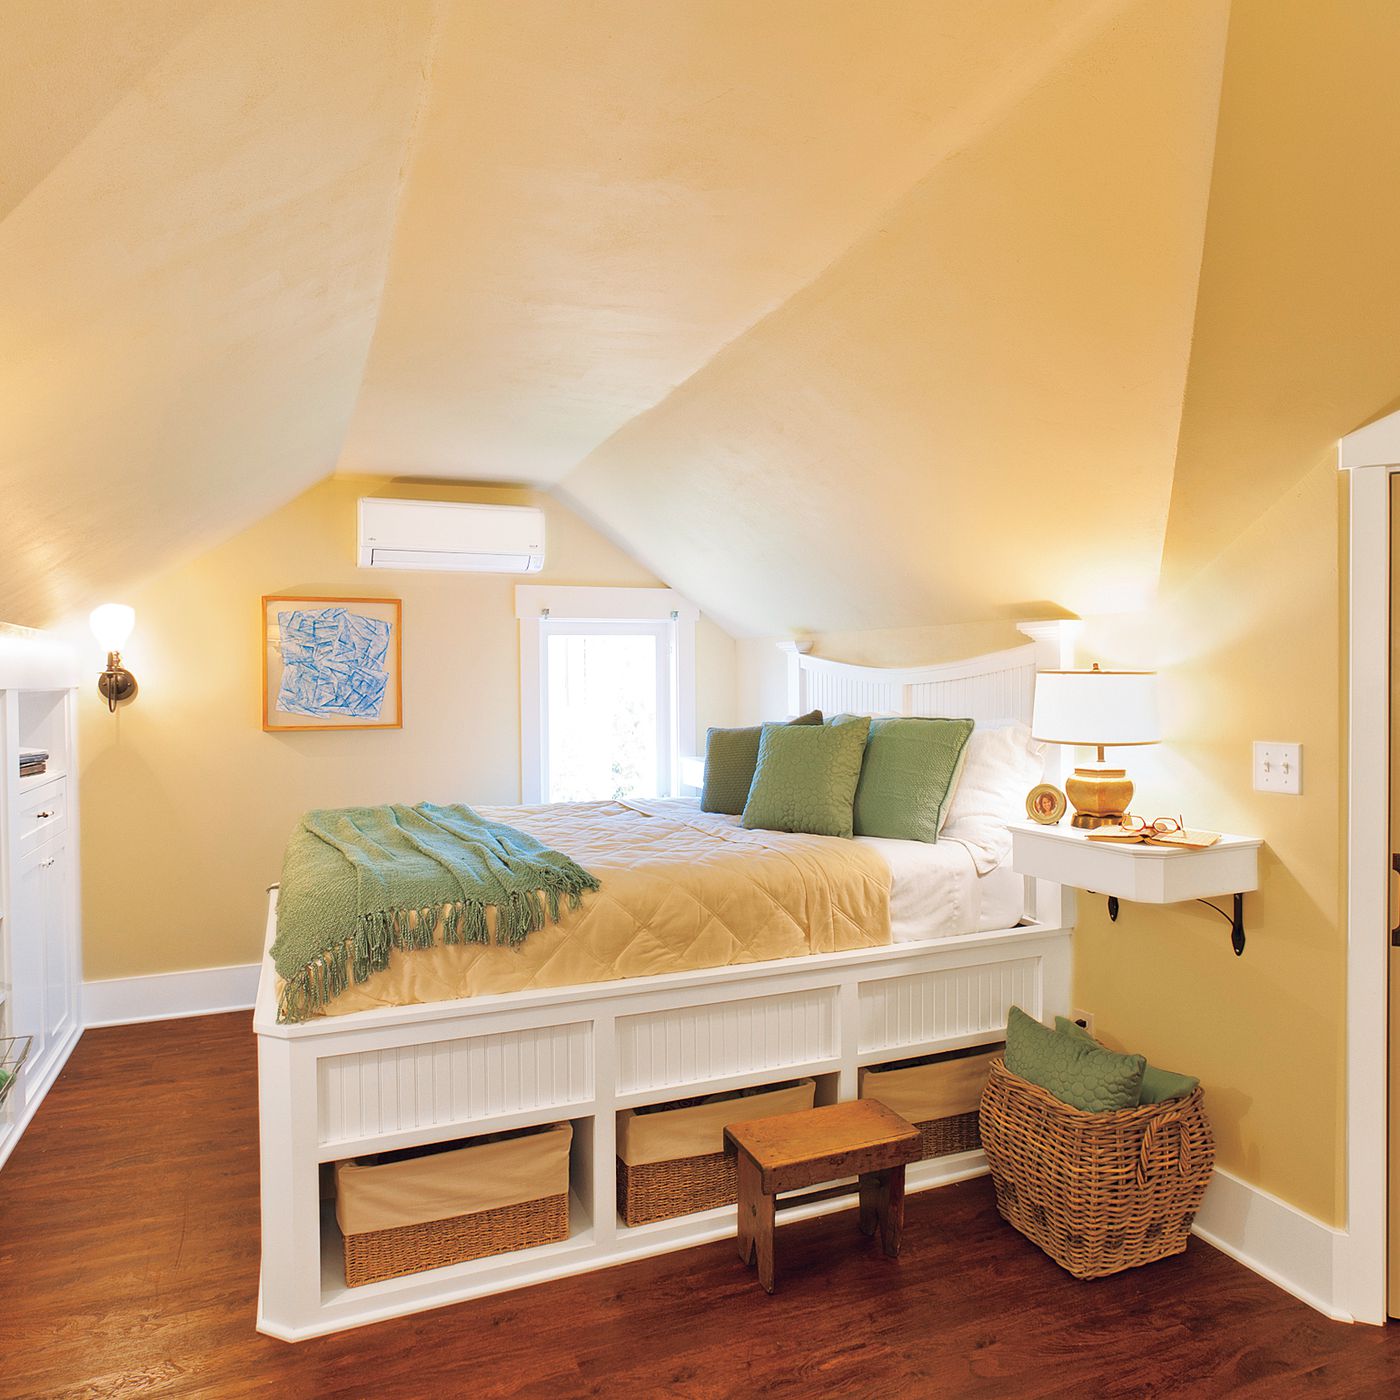 18 Ways to Turn Unused Space Into the Rooms You Need This Old House. 